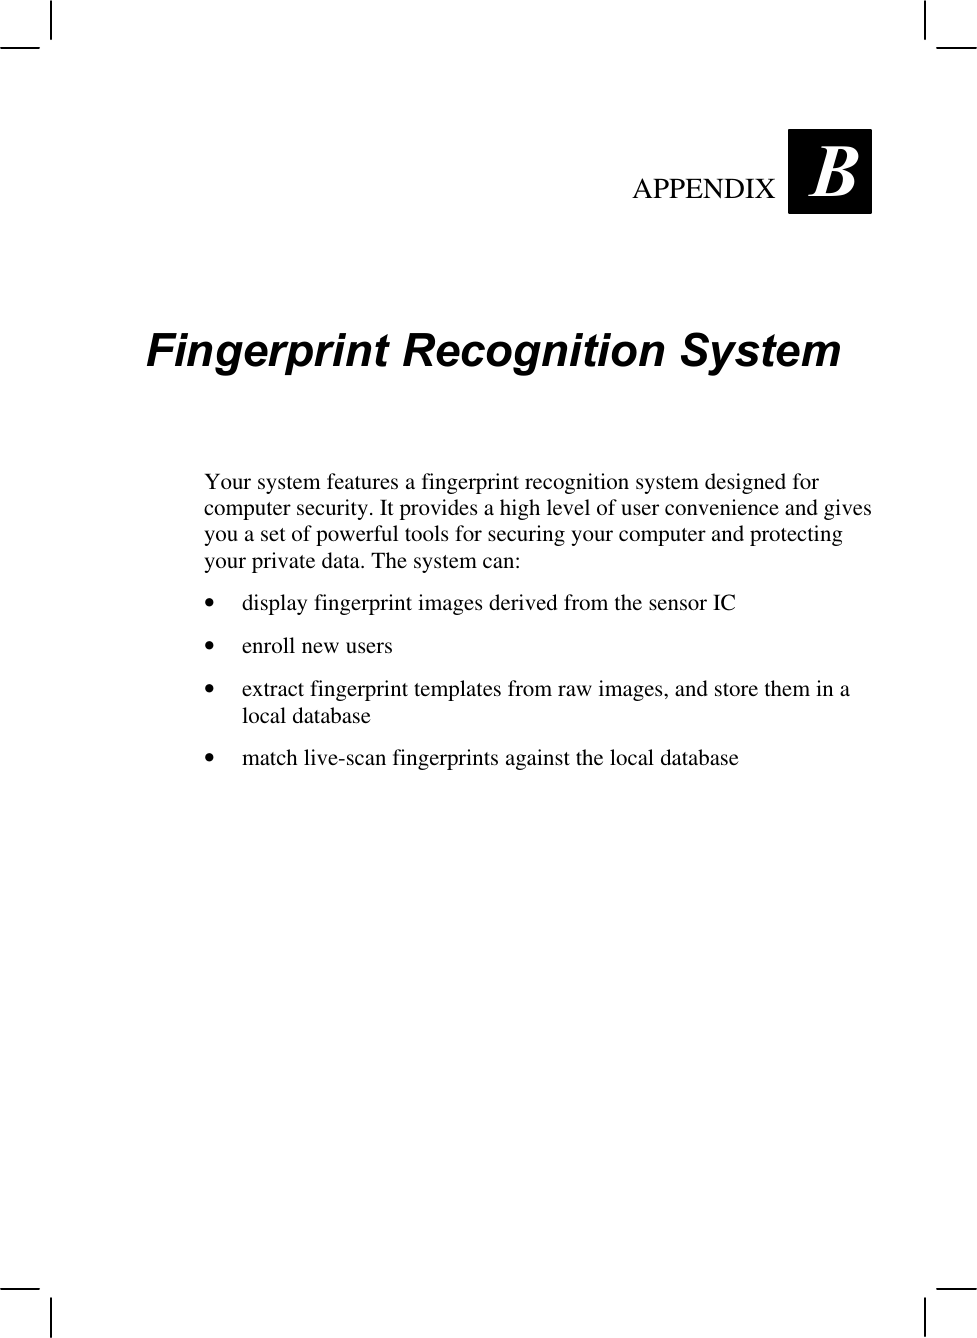 APPENDIX  BFingerprint Recognition SystemYour system features a fingerprint recognition system designed forcomputer security. It provides a high level of user convenience and givesyou a set of powerful tools for securing your computer and protectingyour private data. The system can:• display fingerprint images derived from the sensor IC• enroll new users• extract fingerprint templates from raw images, and store them in alocal database• match live-scan fingerprints against the local database